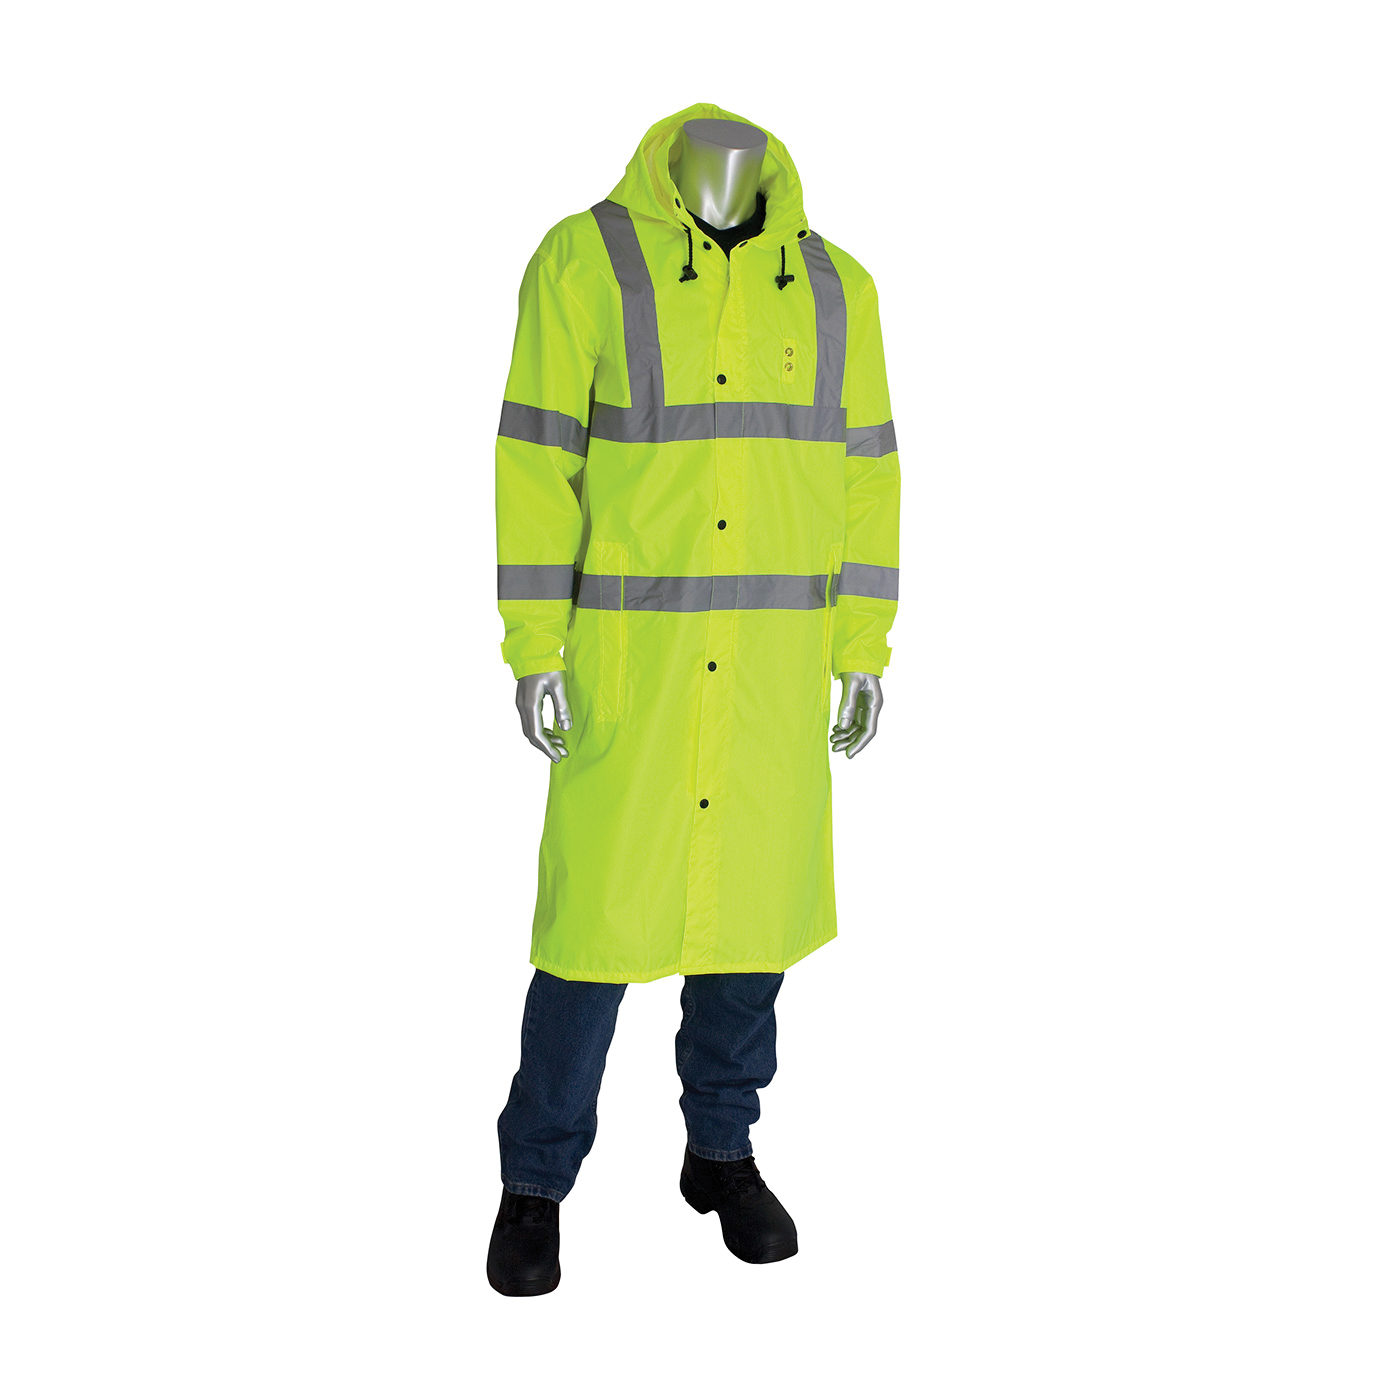 PIP® FALCON™ Viz™ 353-1048-LY/S All Purpose Waterproof Rain Coat, S, Hi-Viz Lime Yellow, 150D Polyester Coated with Polyurethane, Resists: Water, ANSI 107 Type R Class 3, Concealed Hood